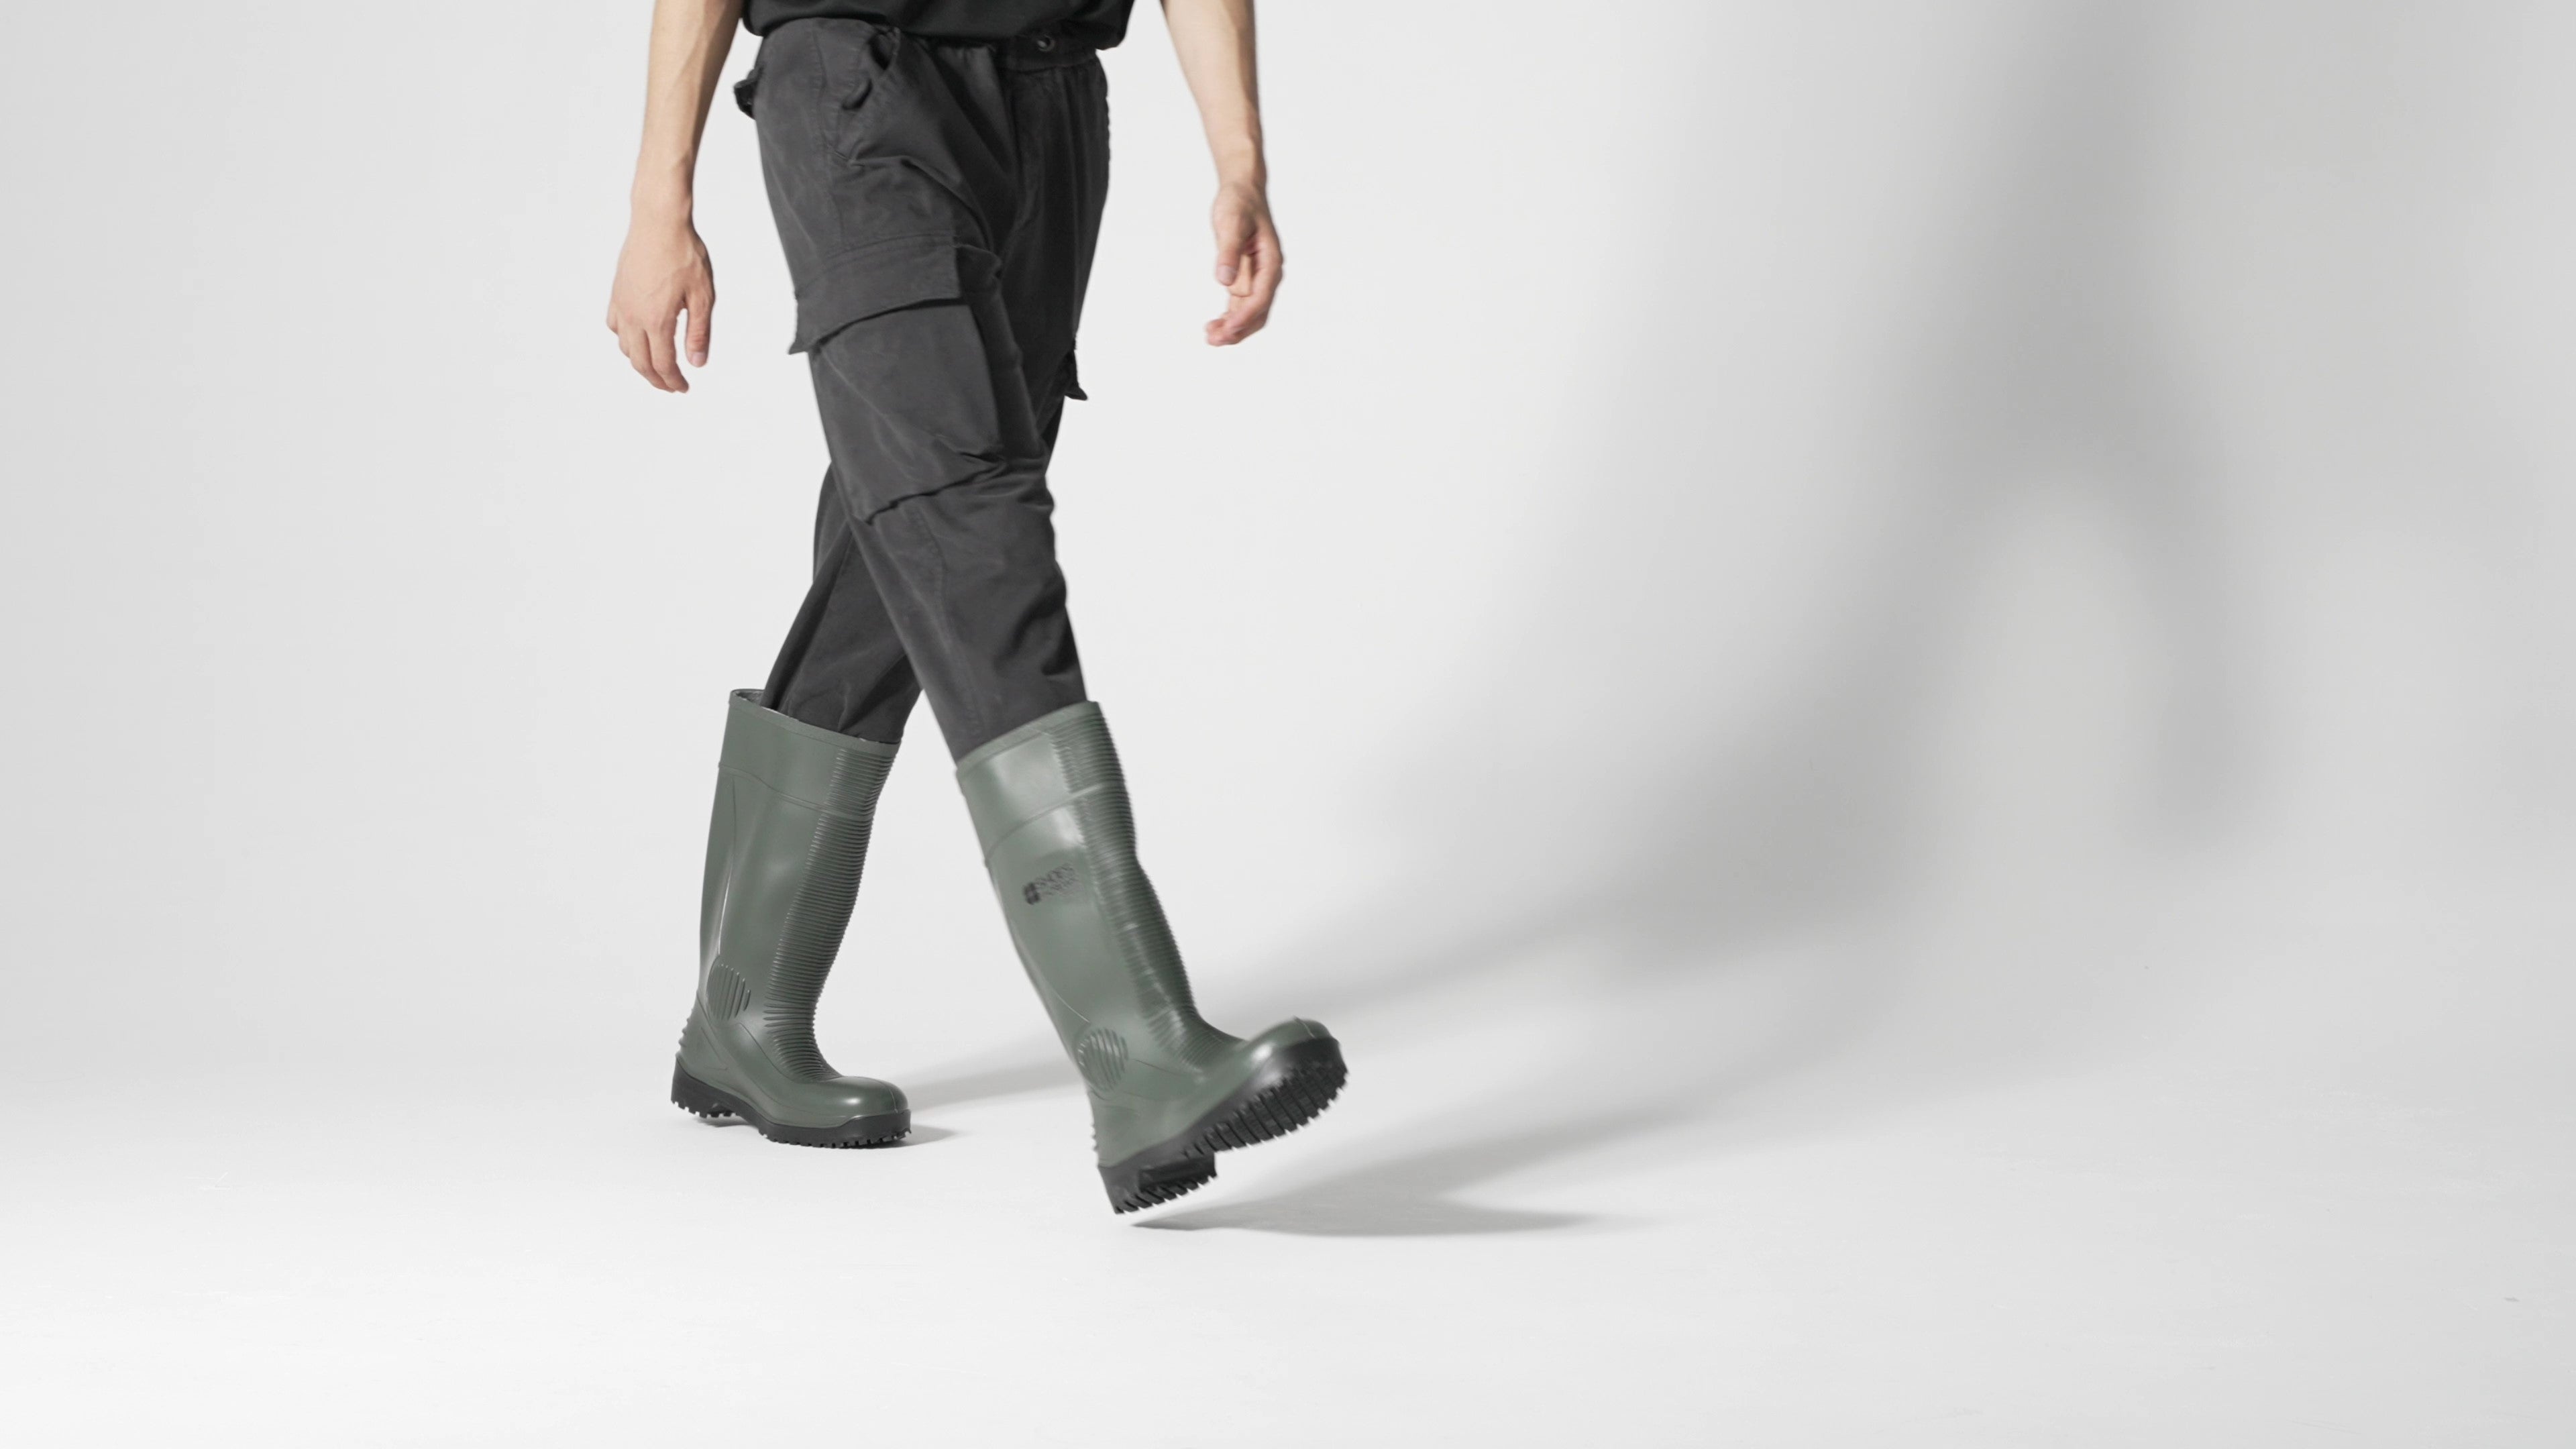 The Guardian Green from Shoes For Crews waterproof wellington boots offers superior slip resistance on a variety of flooring surfaces, product video.